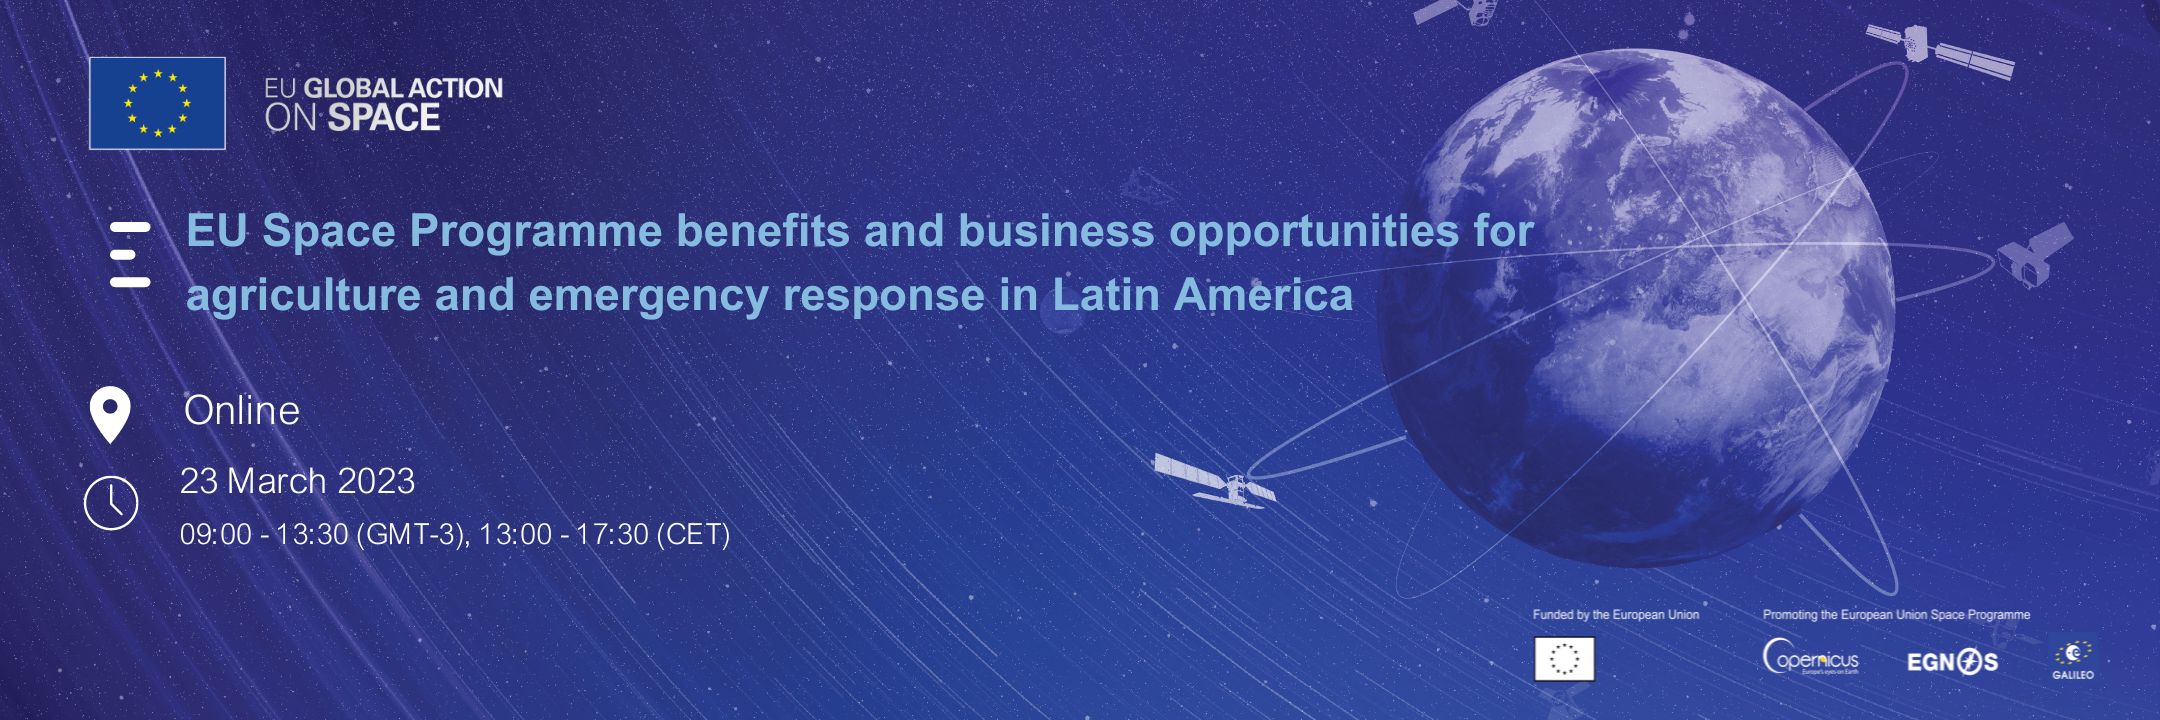 EU Space Programme benefits and business opportunities for agriculture and emergency response in Latin America